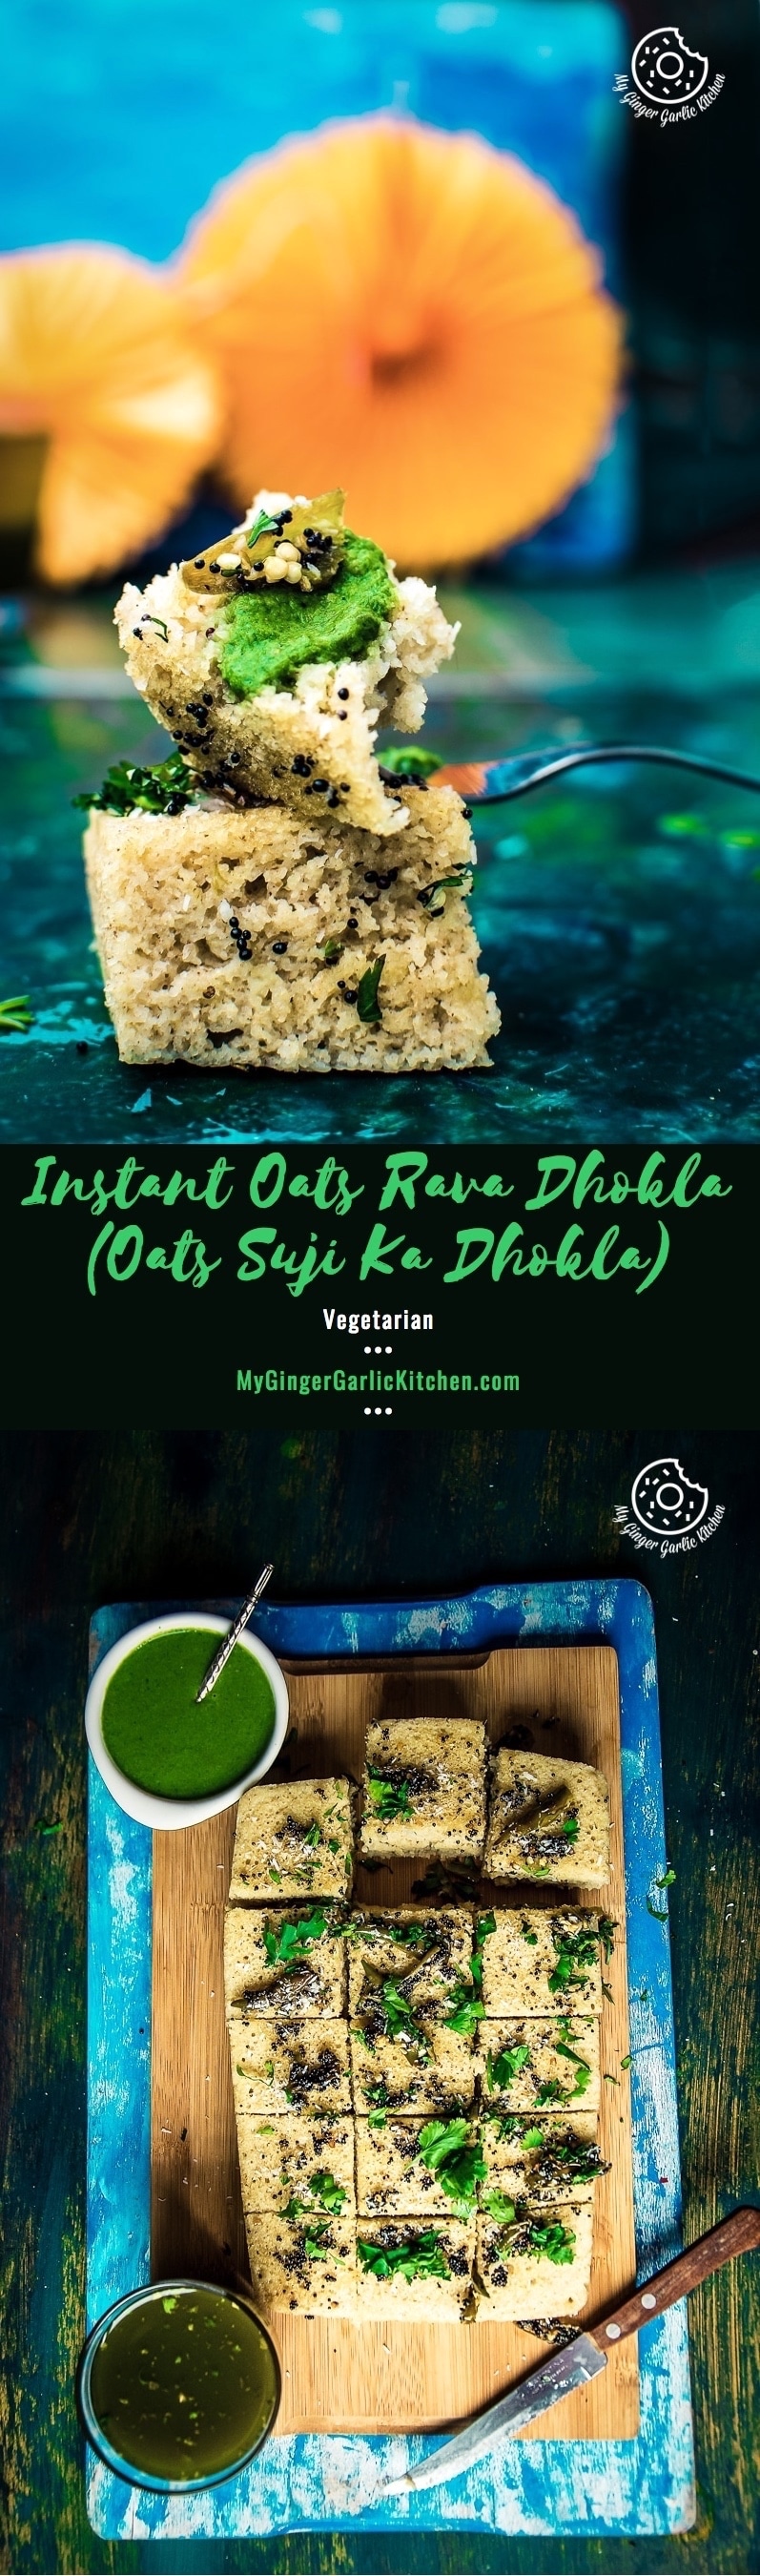 Image - Recipe of Instant Oats Rava Dhokla by my ginger garlic kitchen